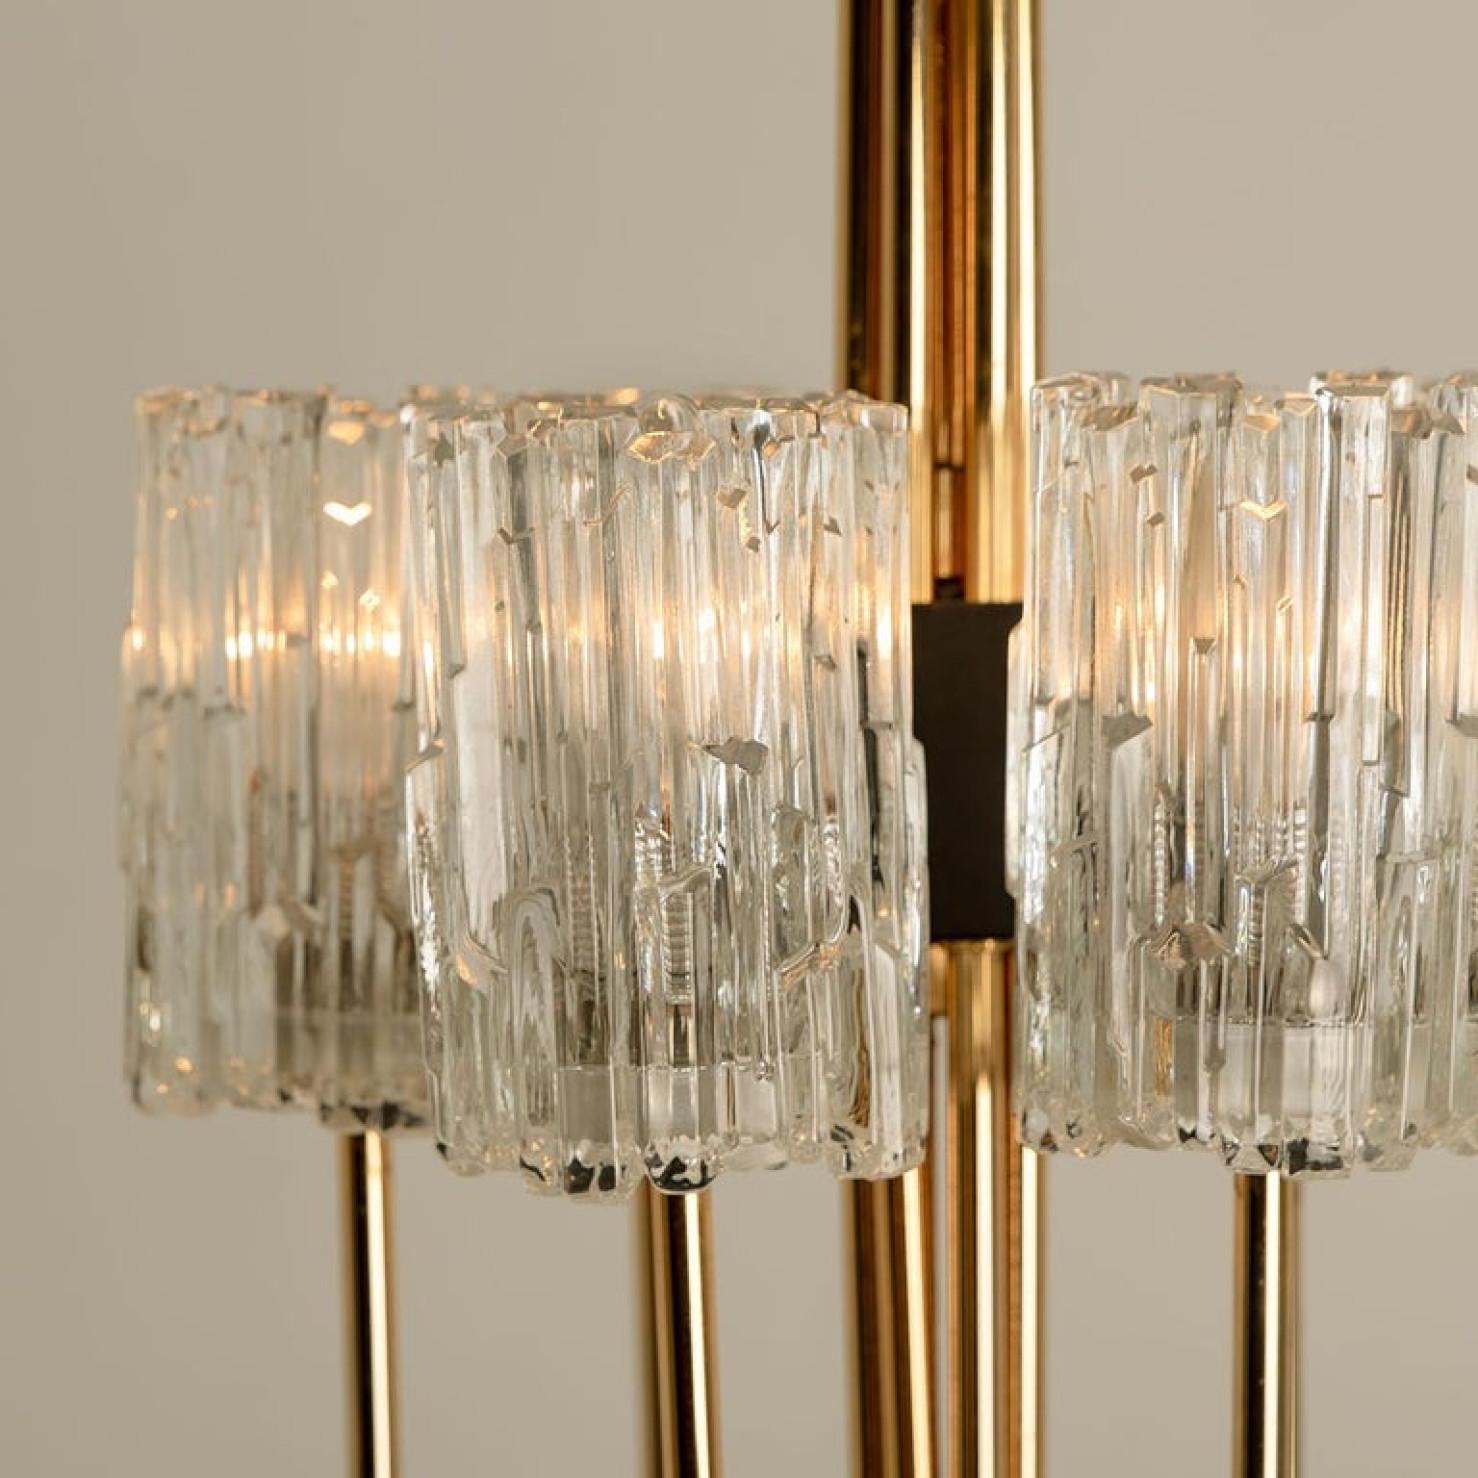 Midcentury Brass and Blown Glass Chandelier by Hillebrand, 1960s For Sale 6